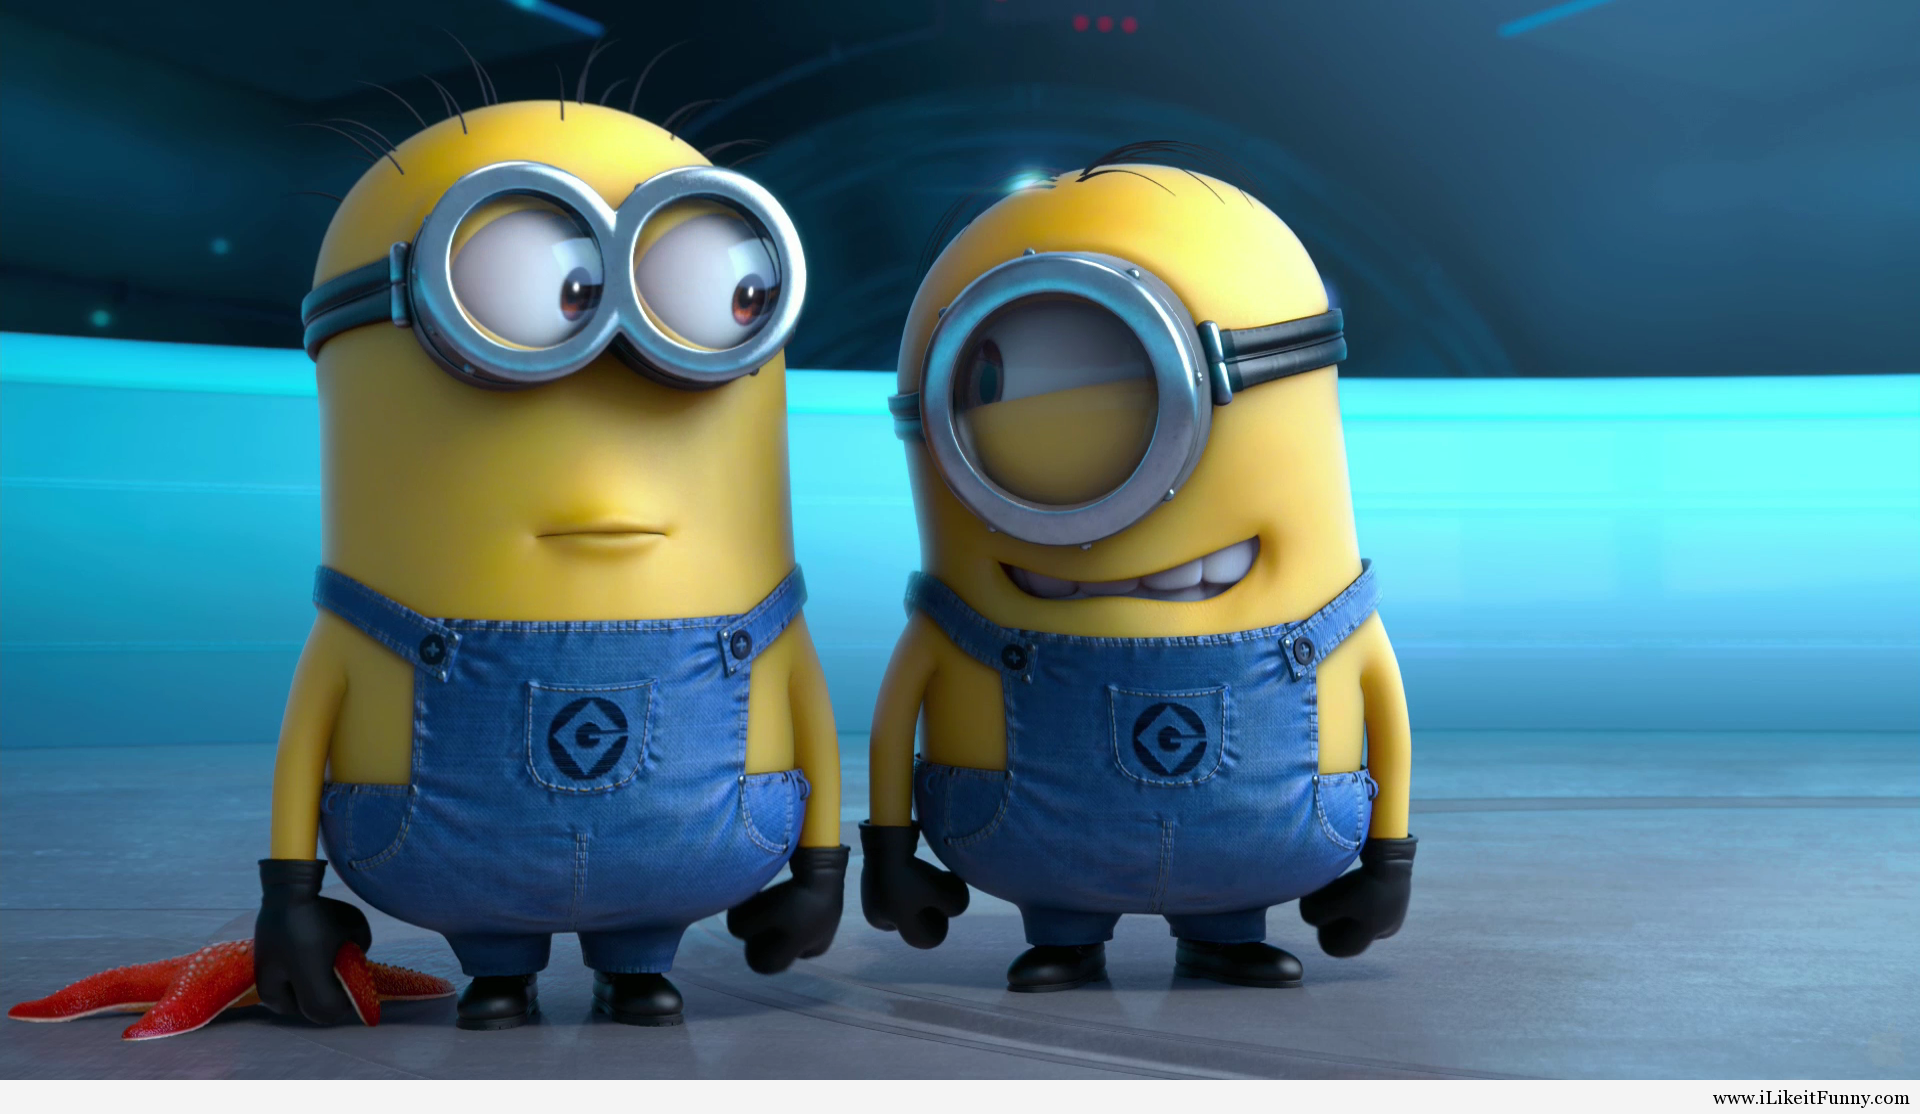 Wallpaper HD Quotes And Sayings With Funny Minions Cartoon